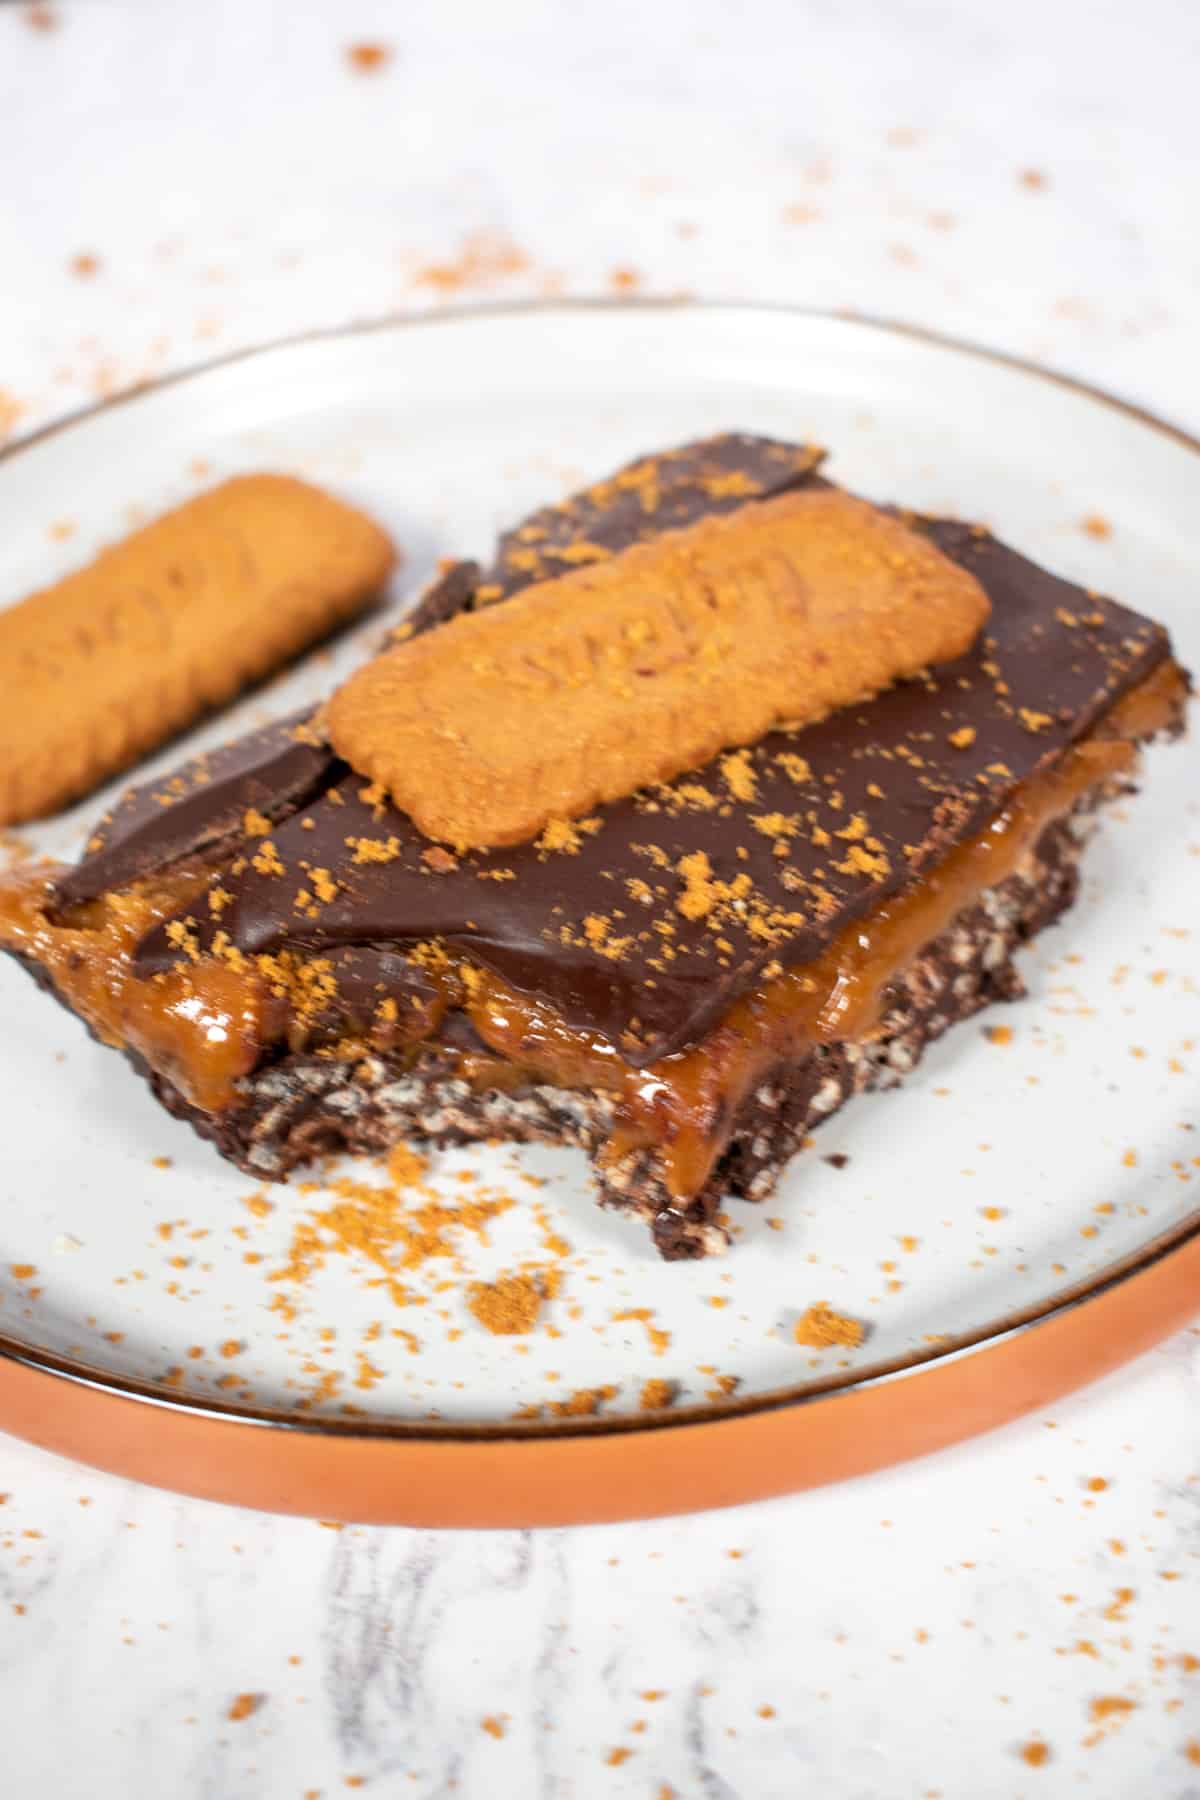 A large vegan caramel bar on a brown and white plate.